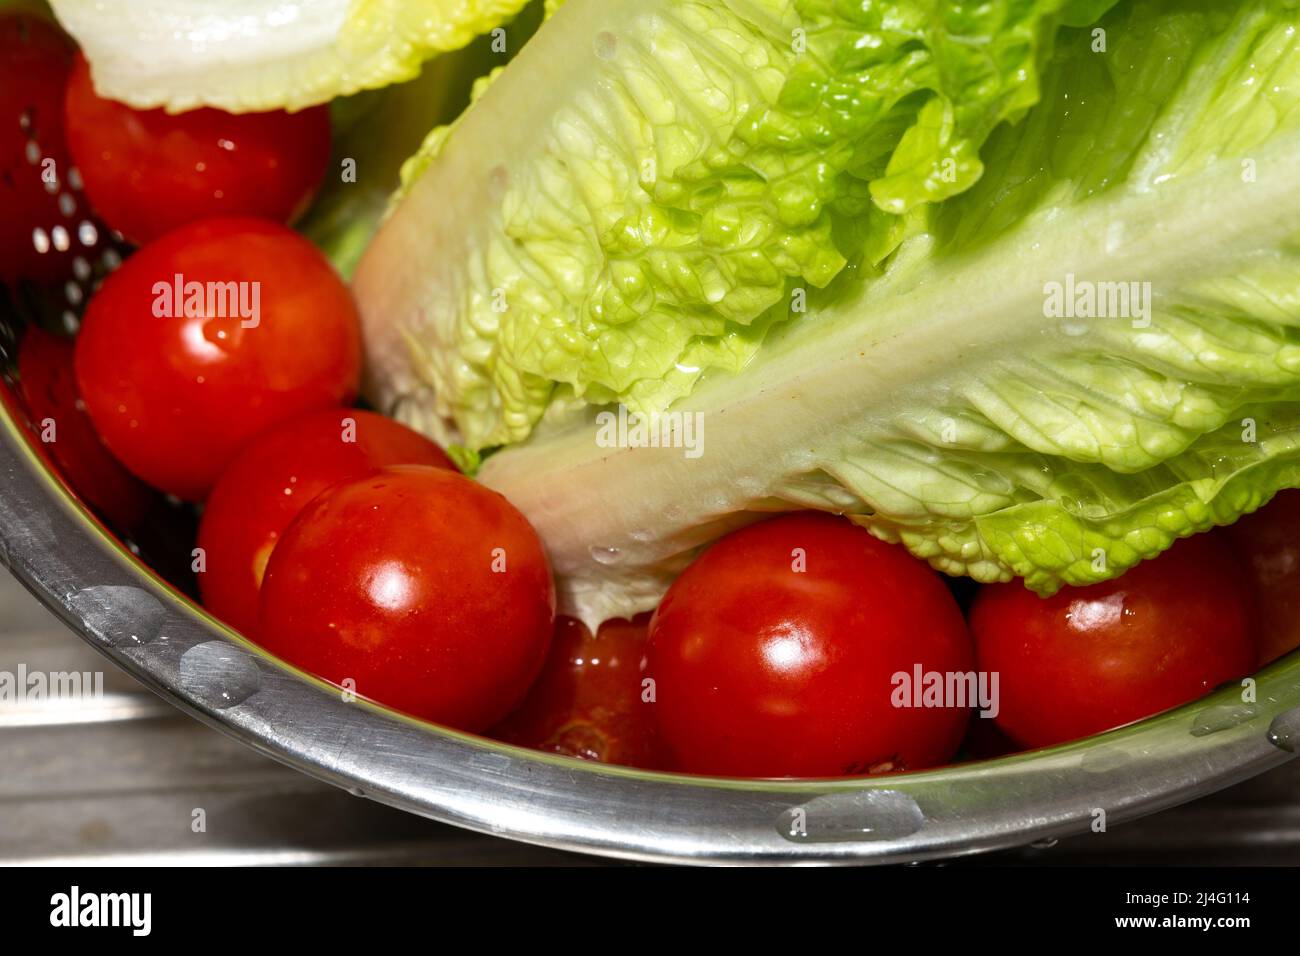 Close-up of small fresh tomatoes and lettuce leaves washed in a metal strainer. Tomatoes on the bottom in selective focus. Stock Photo